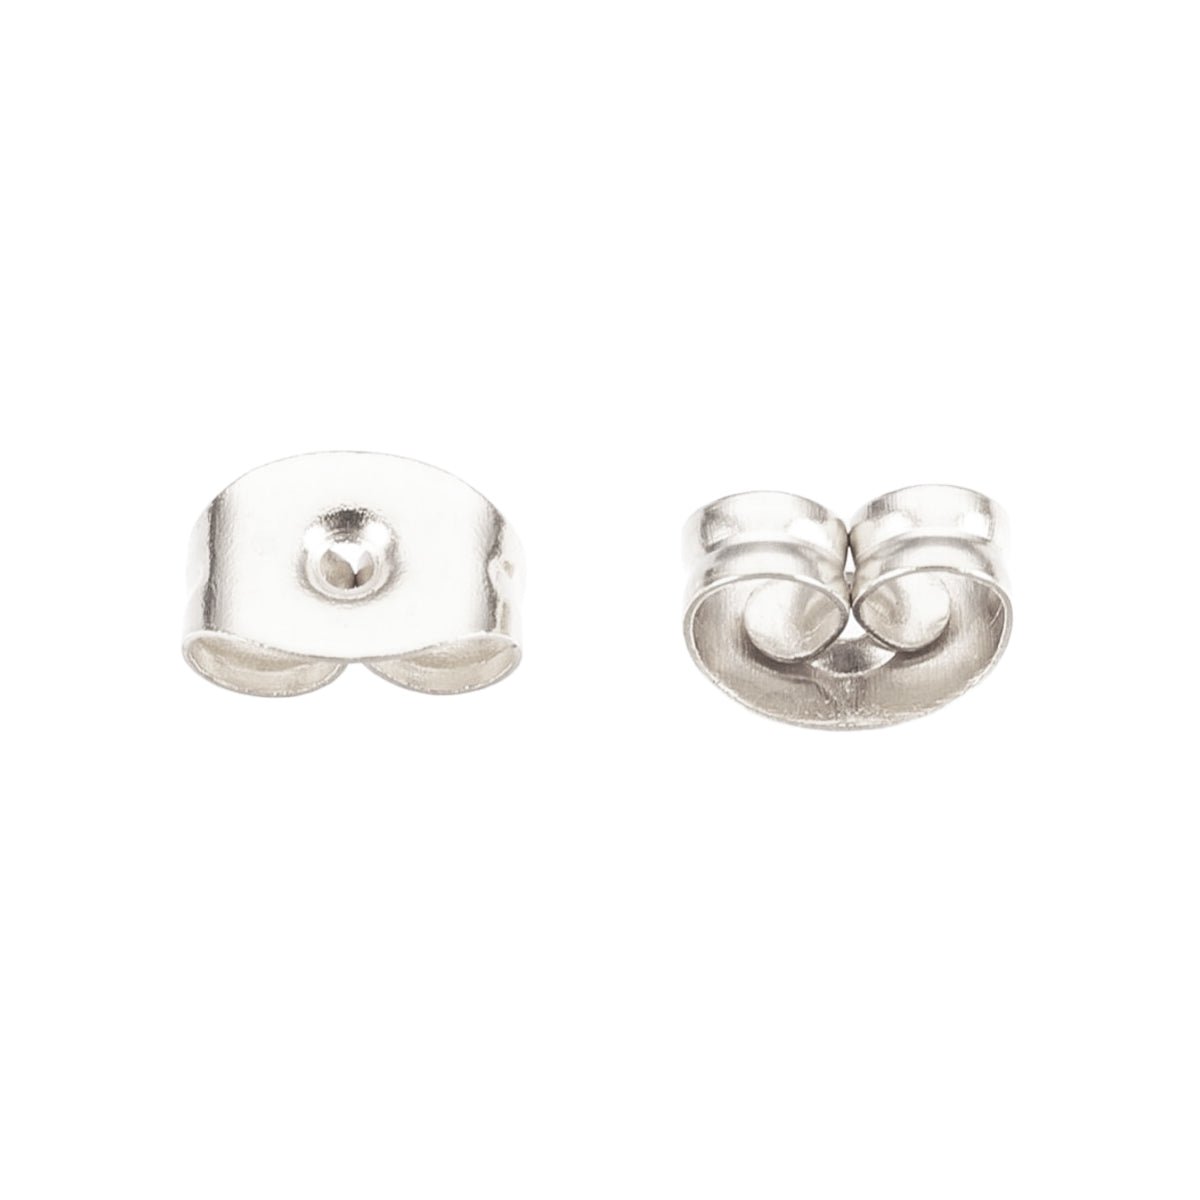 EARRING BACKINGS - GOLD, SILVER OR ROSE GOLD - SO PRETTY CARA COTTER